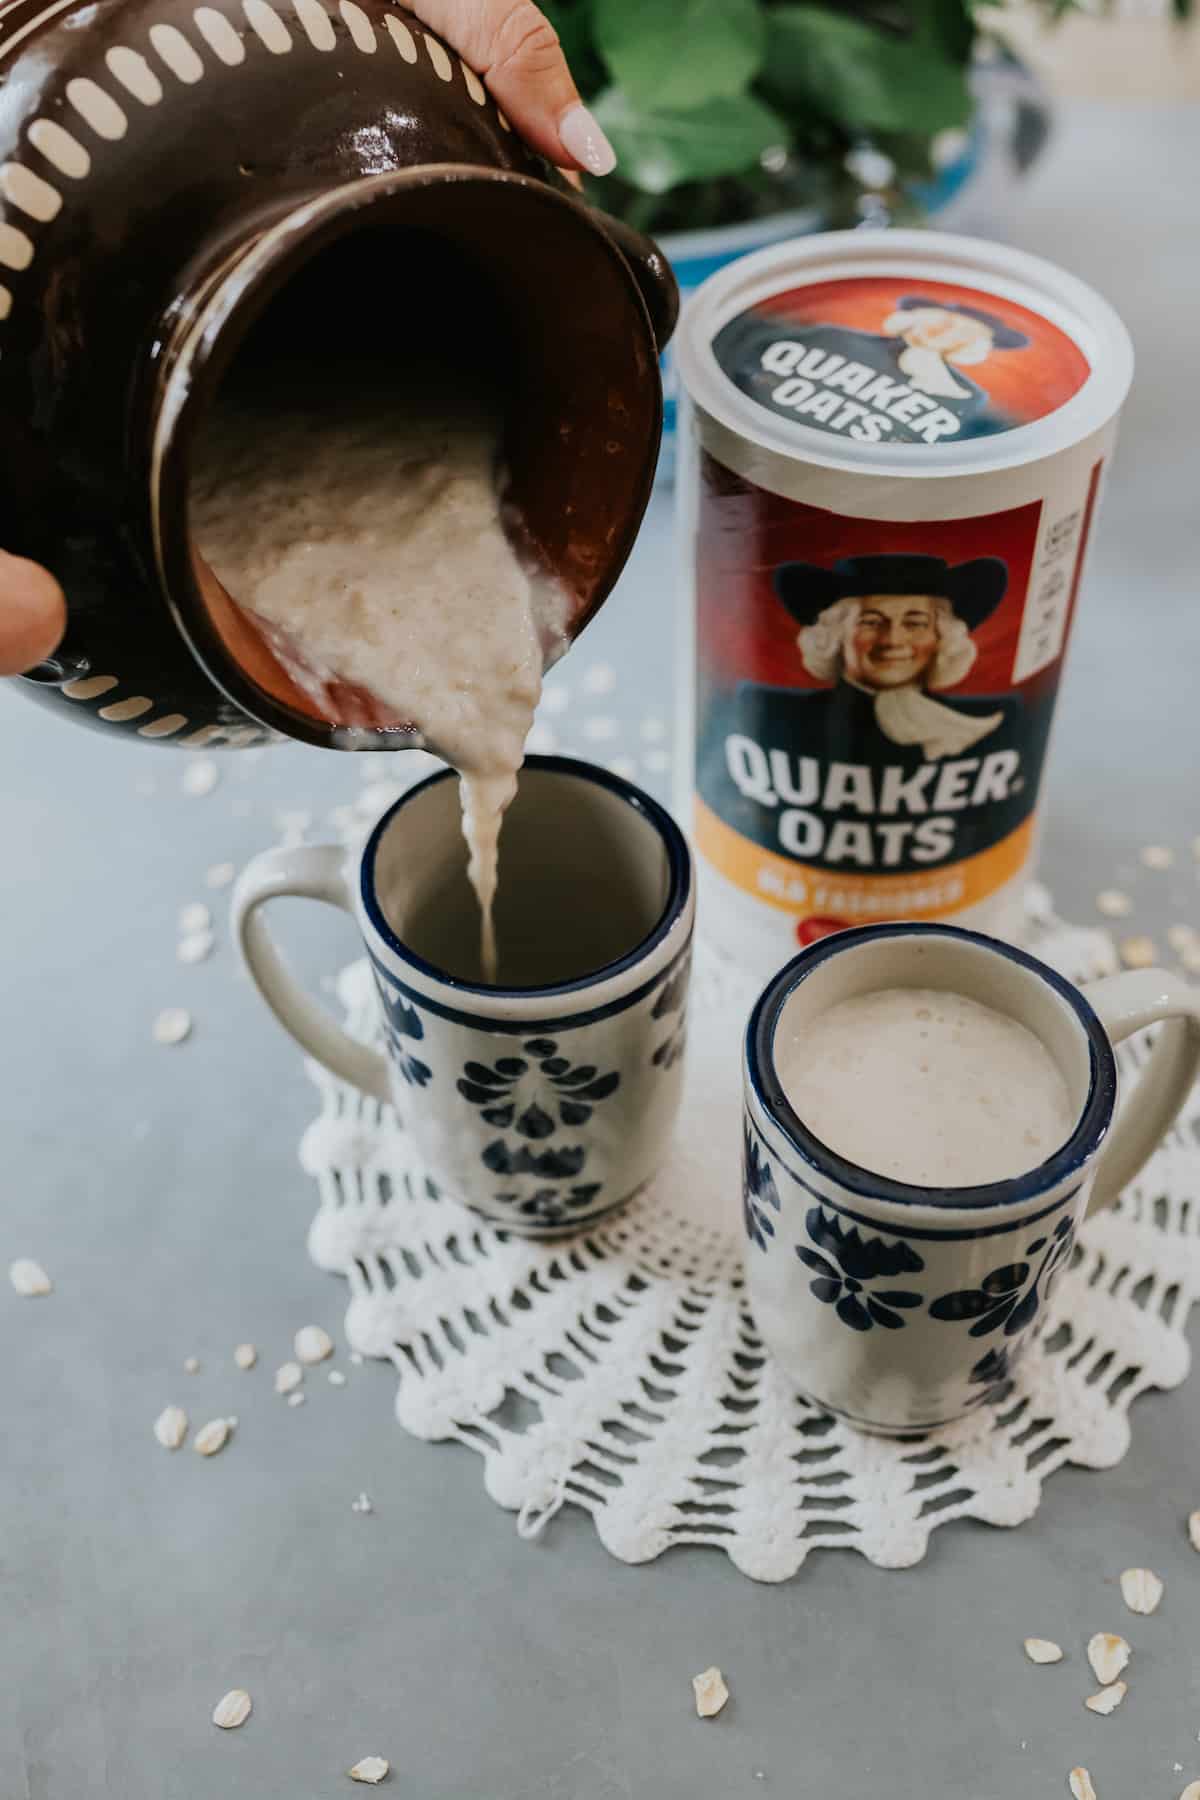 Atole de Avena being poured in cups with Quaker Oats in the background 